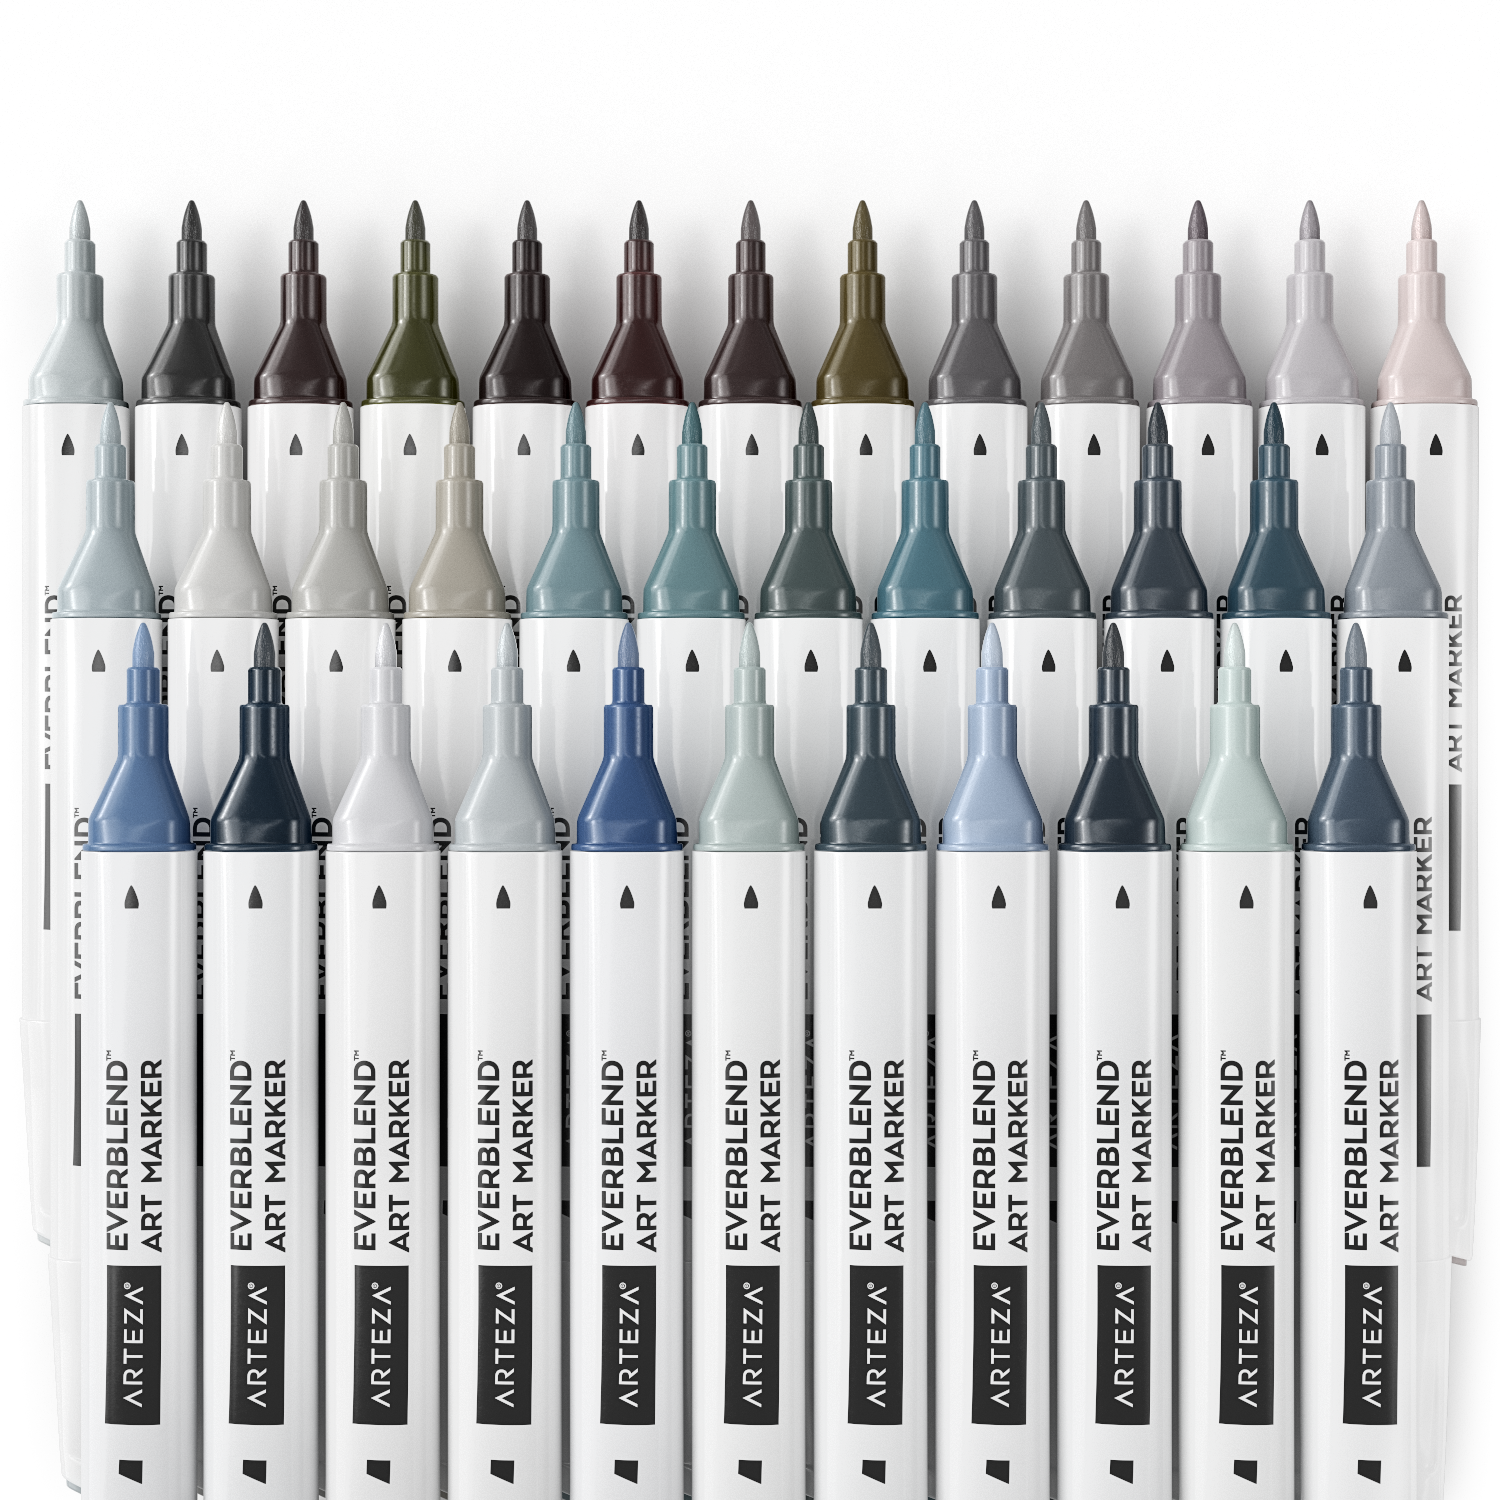 Arteza Art Alcohol Markers, Set of 36 Colors, EverBlend Architecture Tones,  Medium Chisel and Fine Nib, Dual Tip Markers for Drawing and Sketching